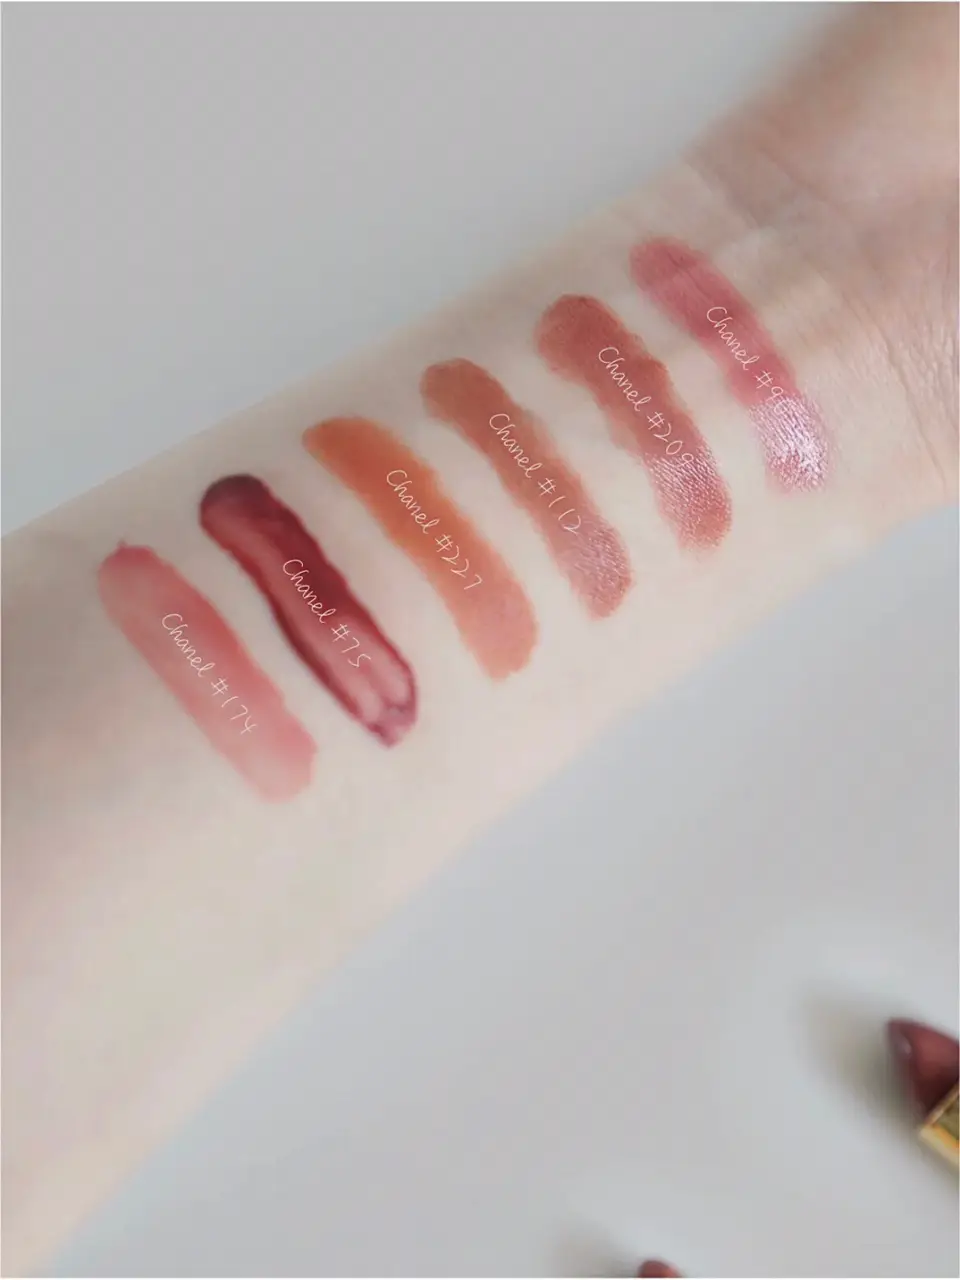 Chanel Lipstick: My 6 Favorite Shades👄, Gallery posted by sallyhel